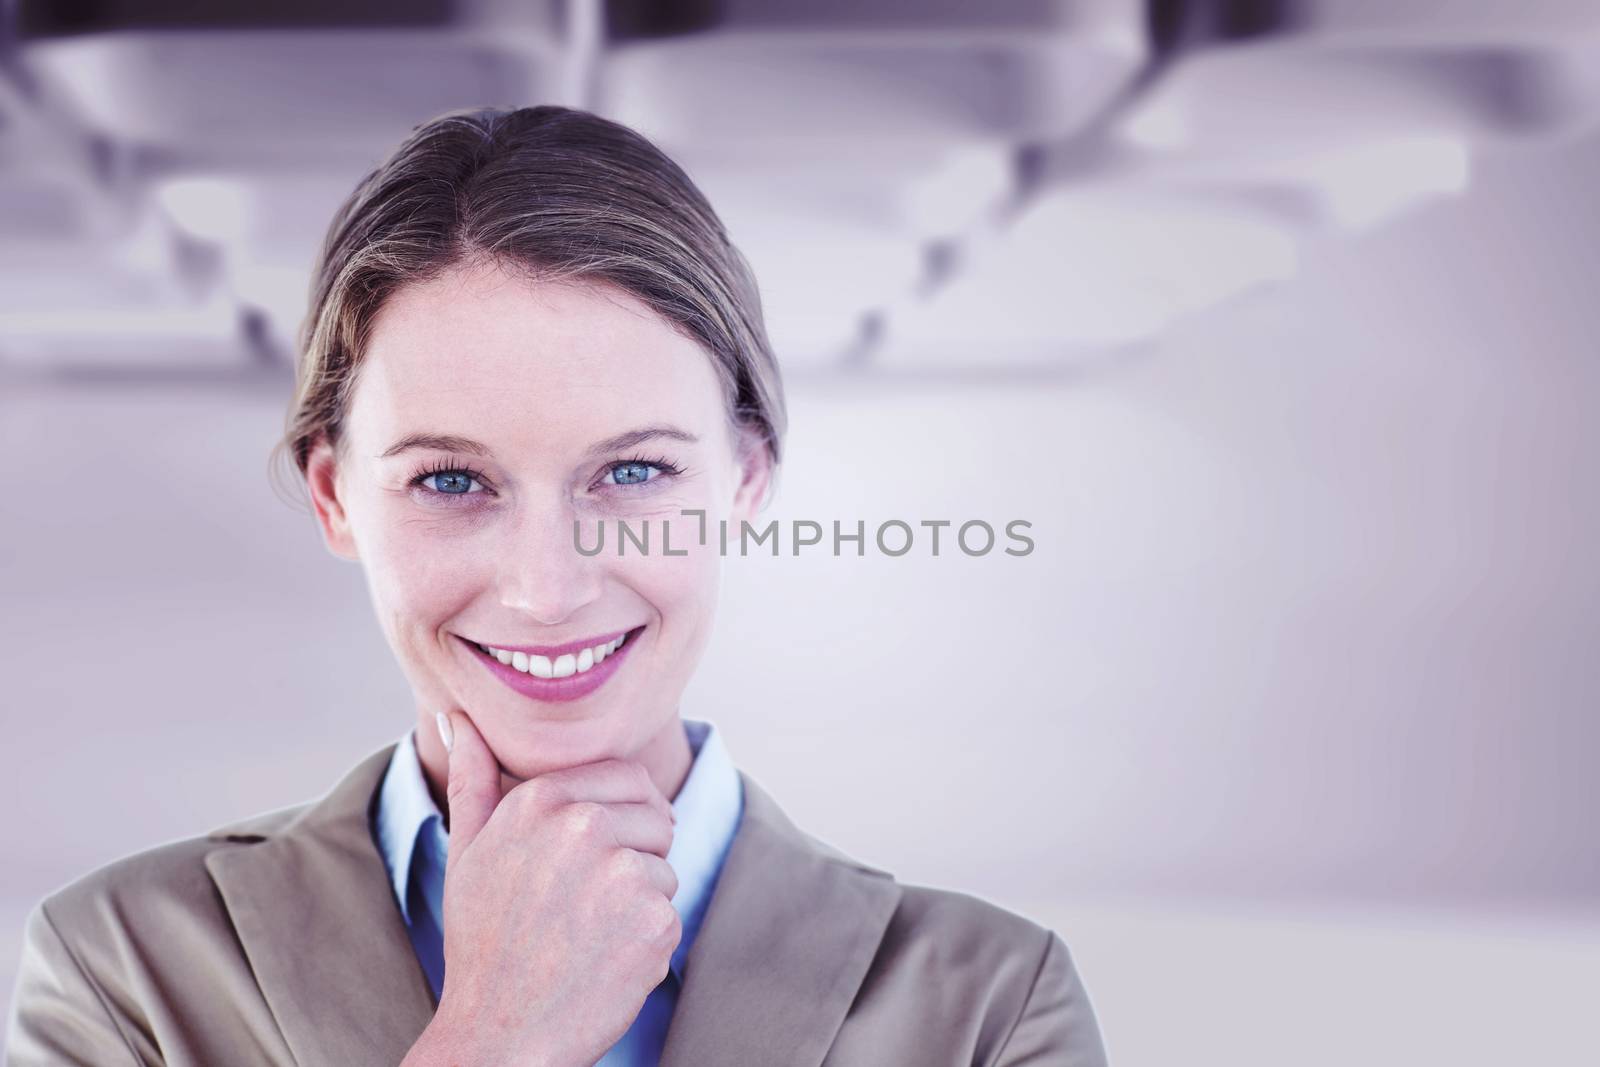 Smiling businesswoman  against white abstract room